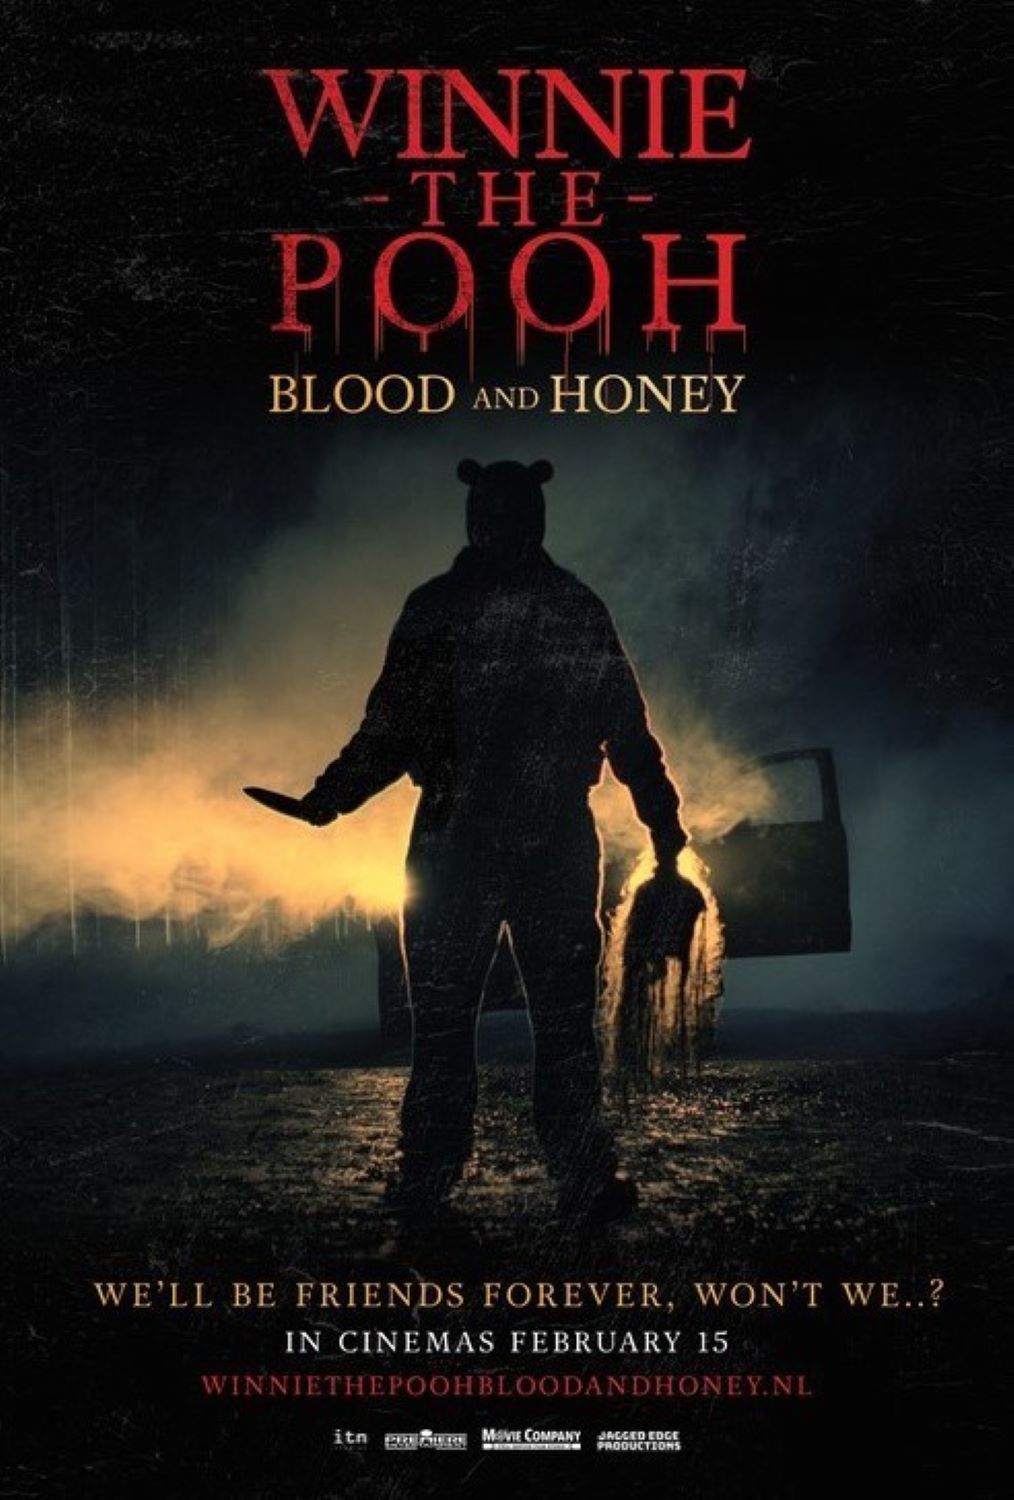 WINNIE-THE-POOH: Blood and Honey